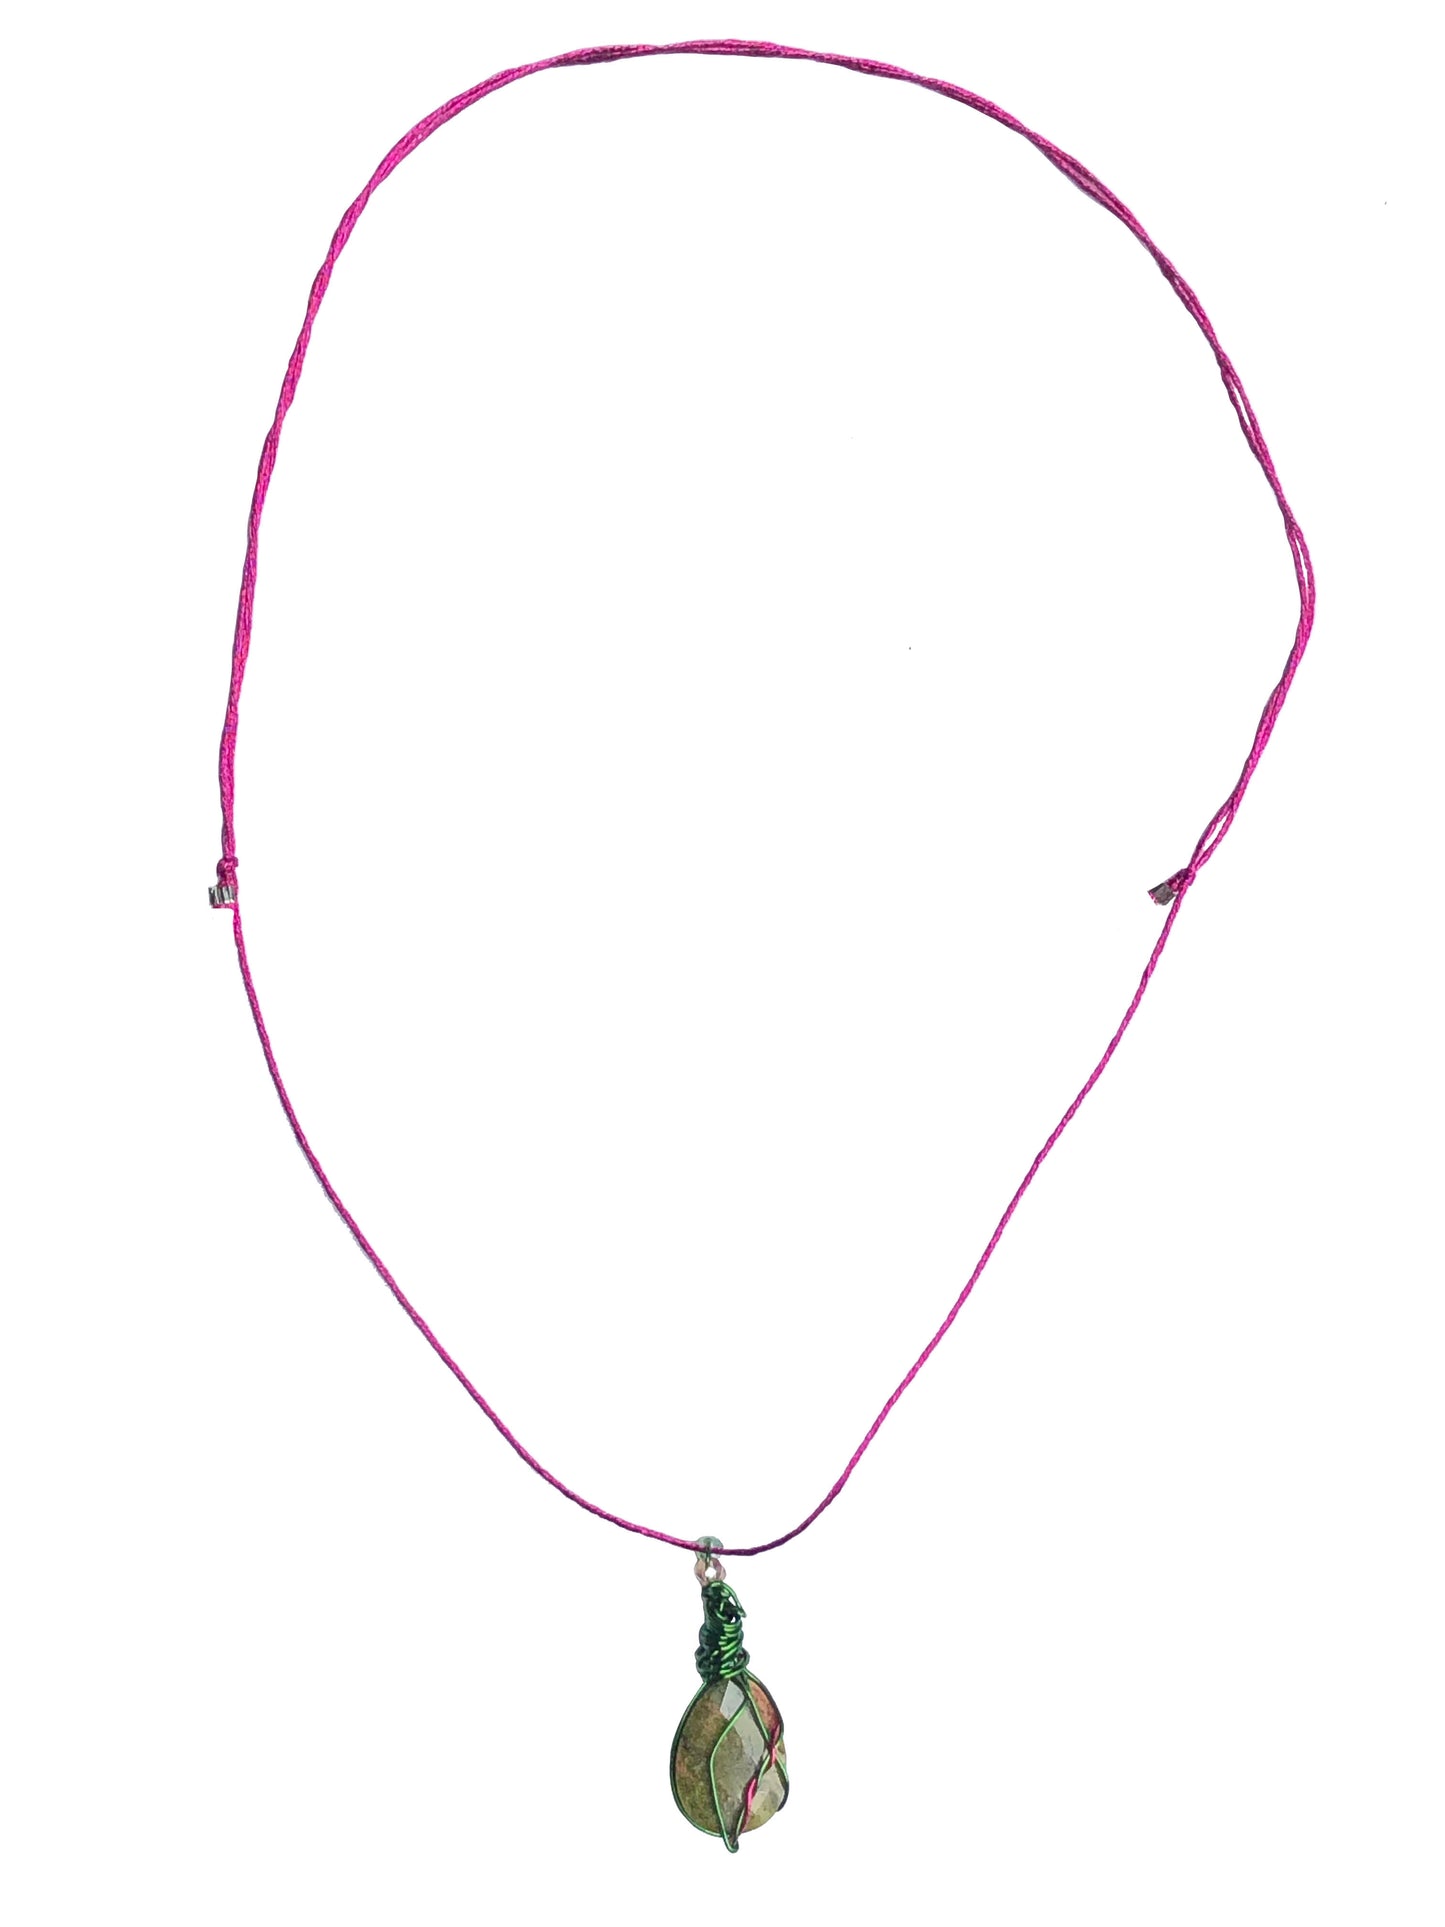 handcrafted green and pink wire wrapped quartz pendant necklace with adjustable sliding knot ties.